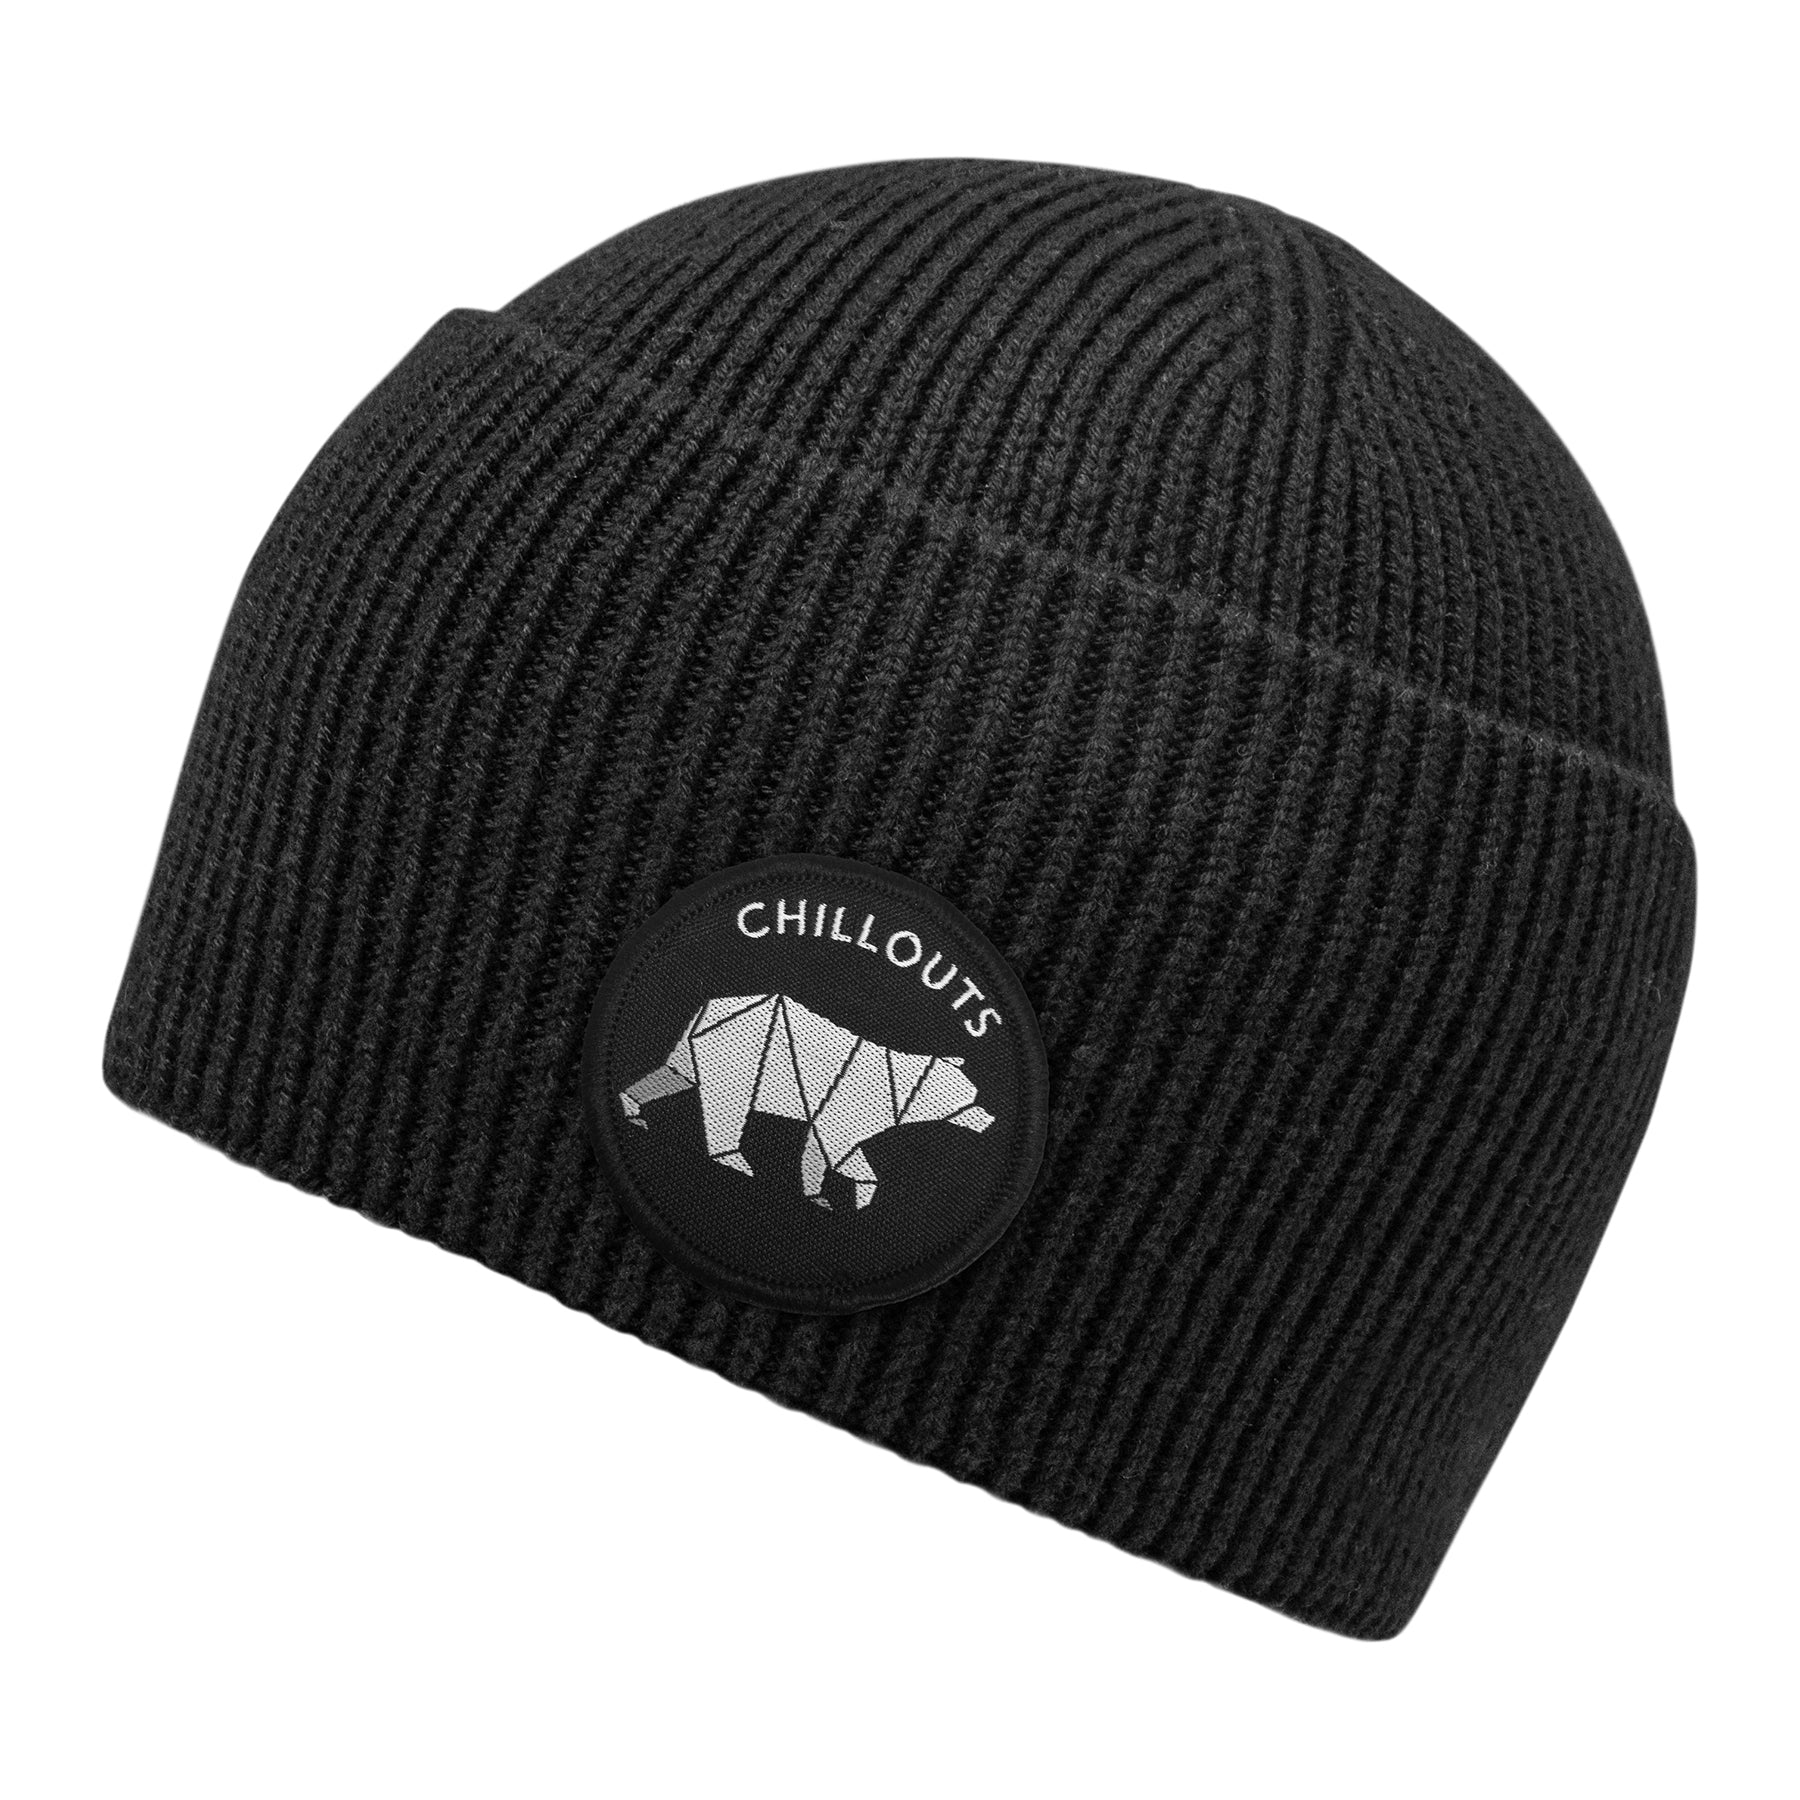 cool cuff embroidery cause for Beanie & hat Chillouts good – with a Headwear -